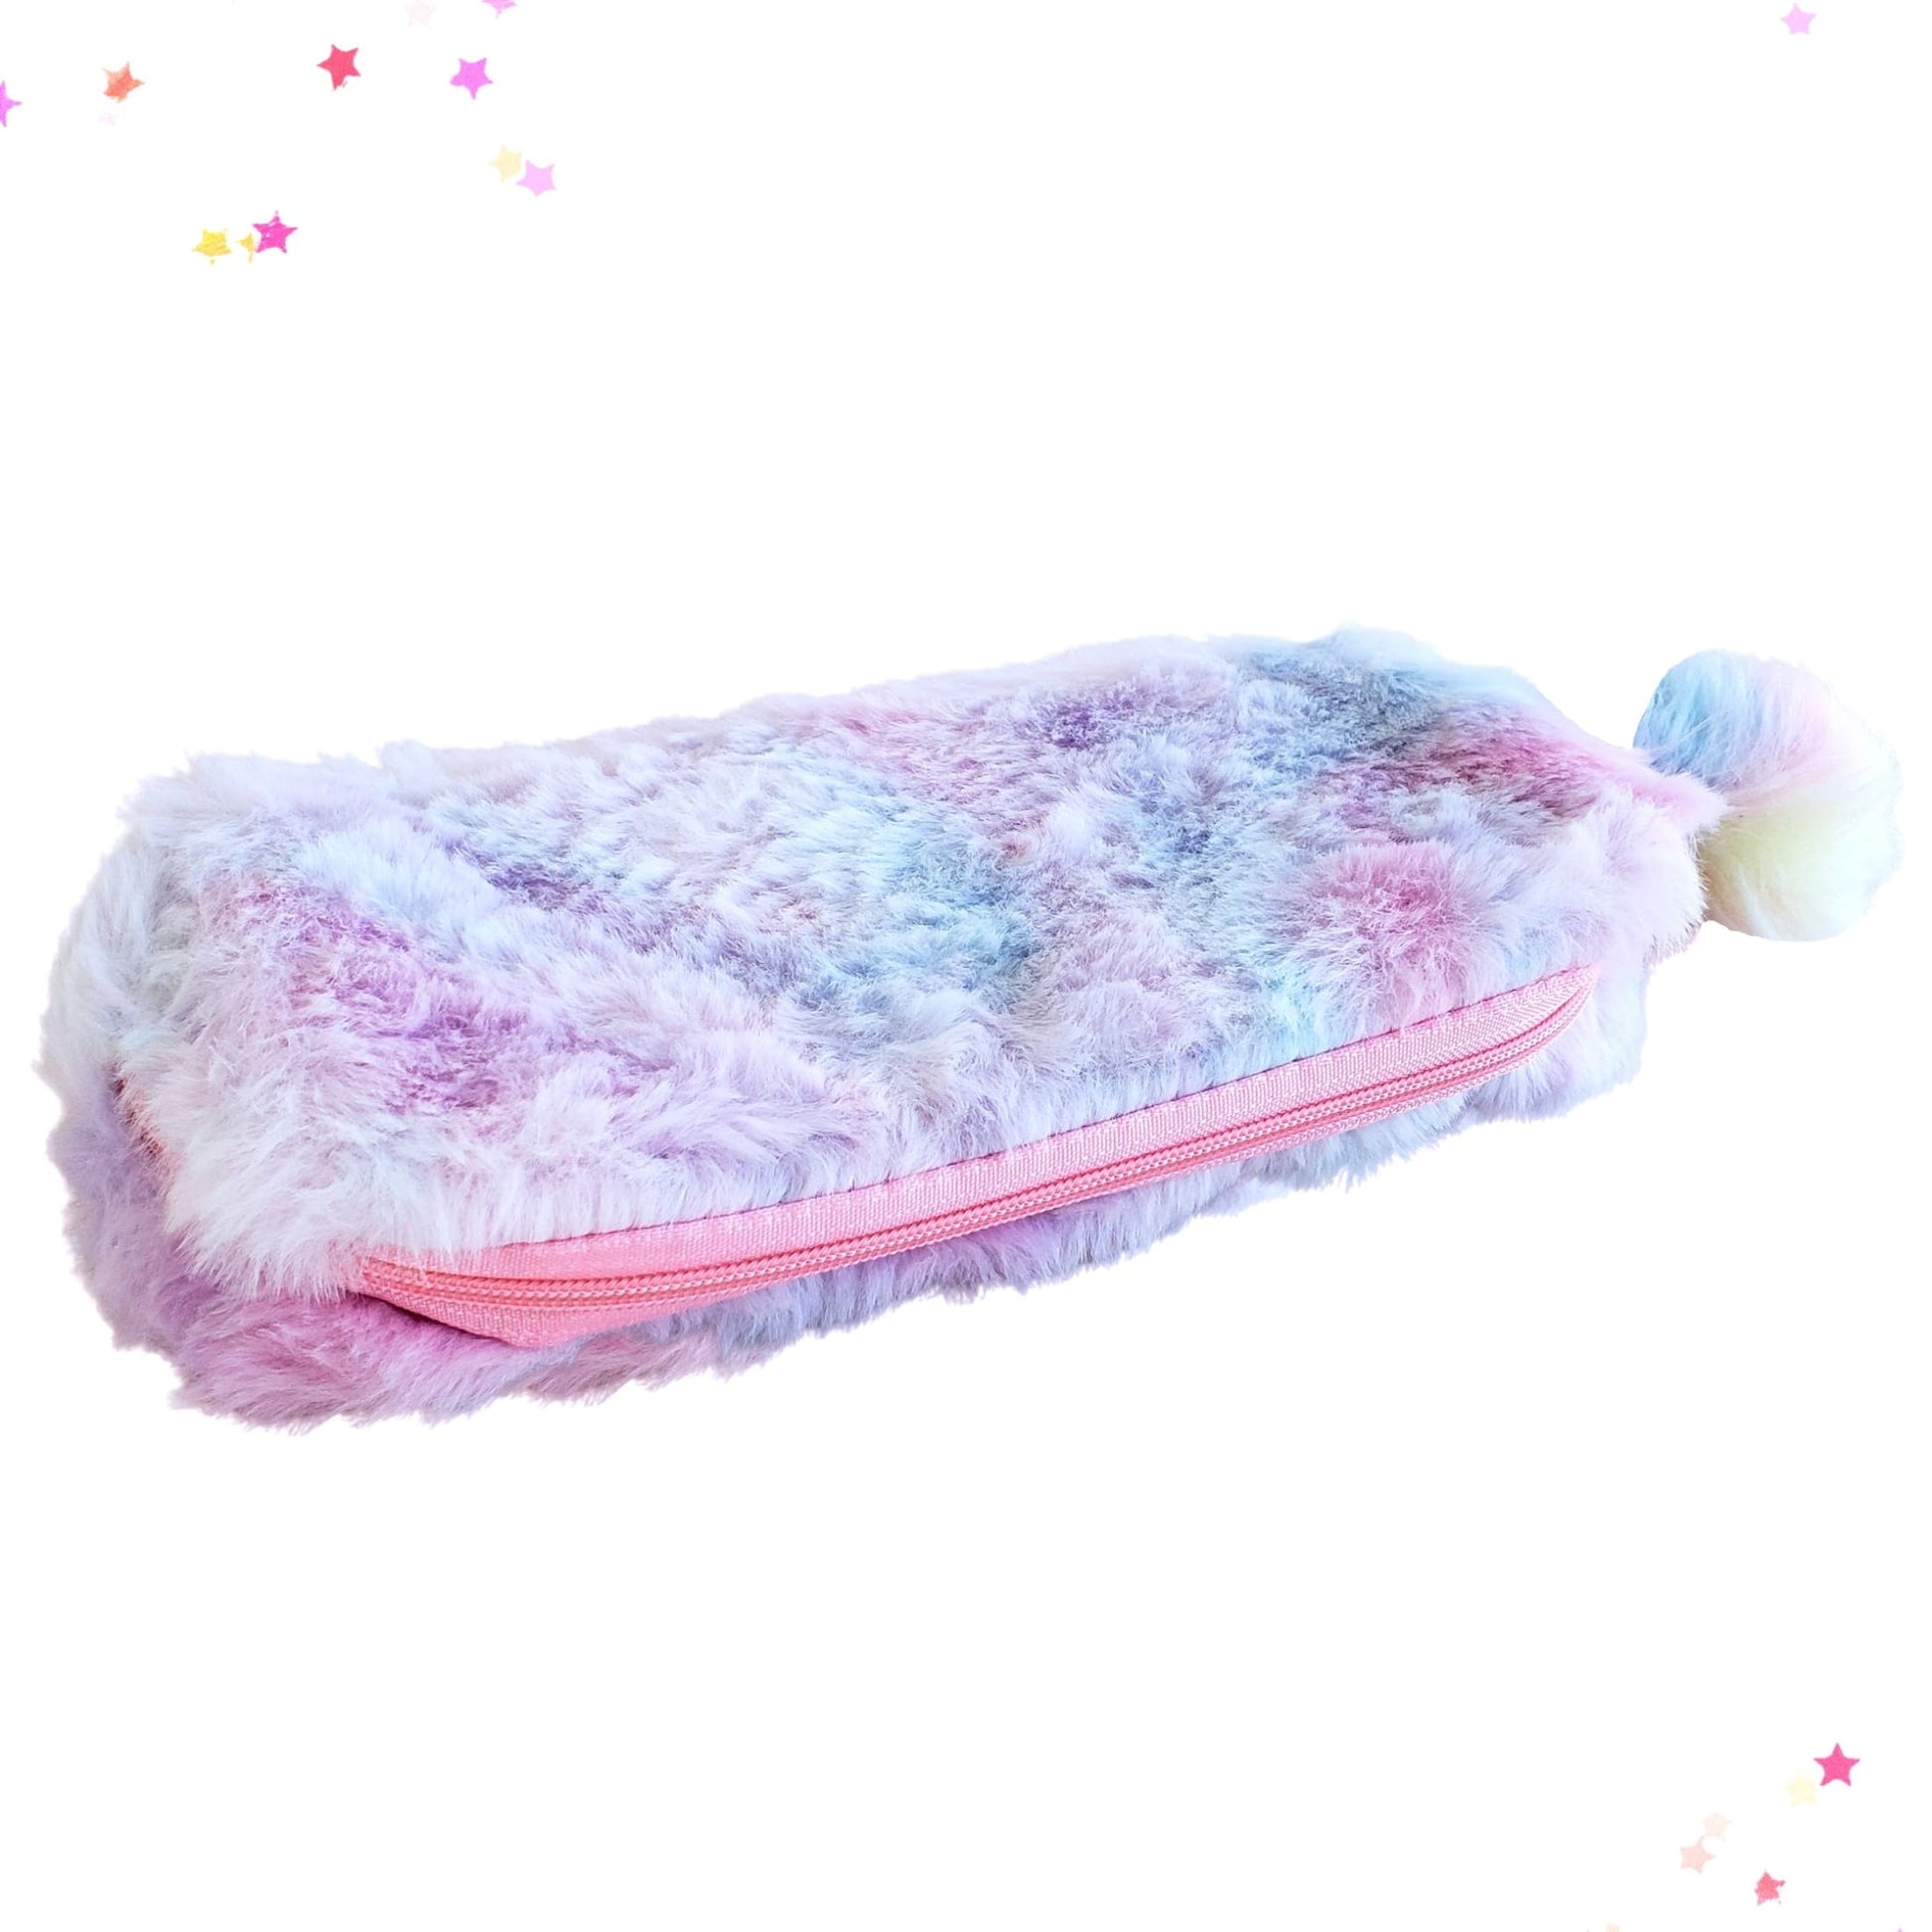 Cotton Candy Plush Pencil Case from Confetti Kitty, Only 6.99